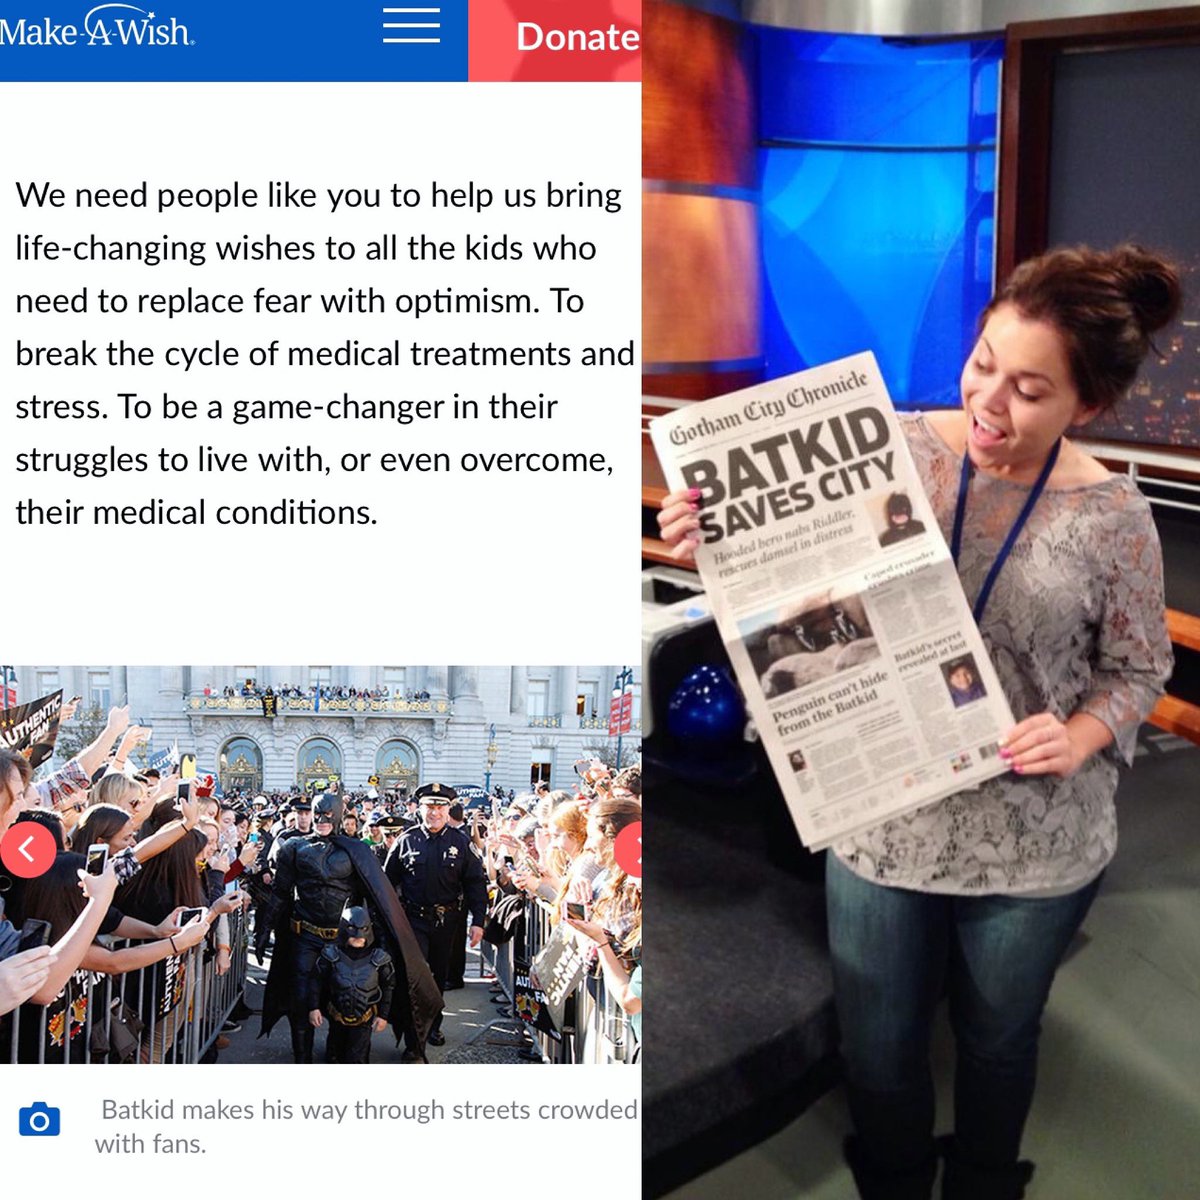 11/15/2013 was one of my favorite days working in news. Thousands transformed SF into Gotham City to rally behind #SFBatKid. I was an intern in this pic—thrilled to help share the story, of a 5 yo cancer survivor, that saved our city. #MakeaWish 
wish.org/batkid